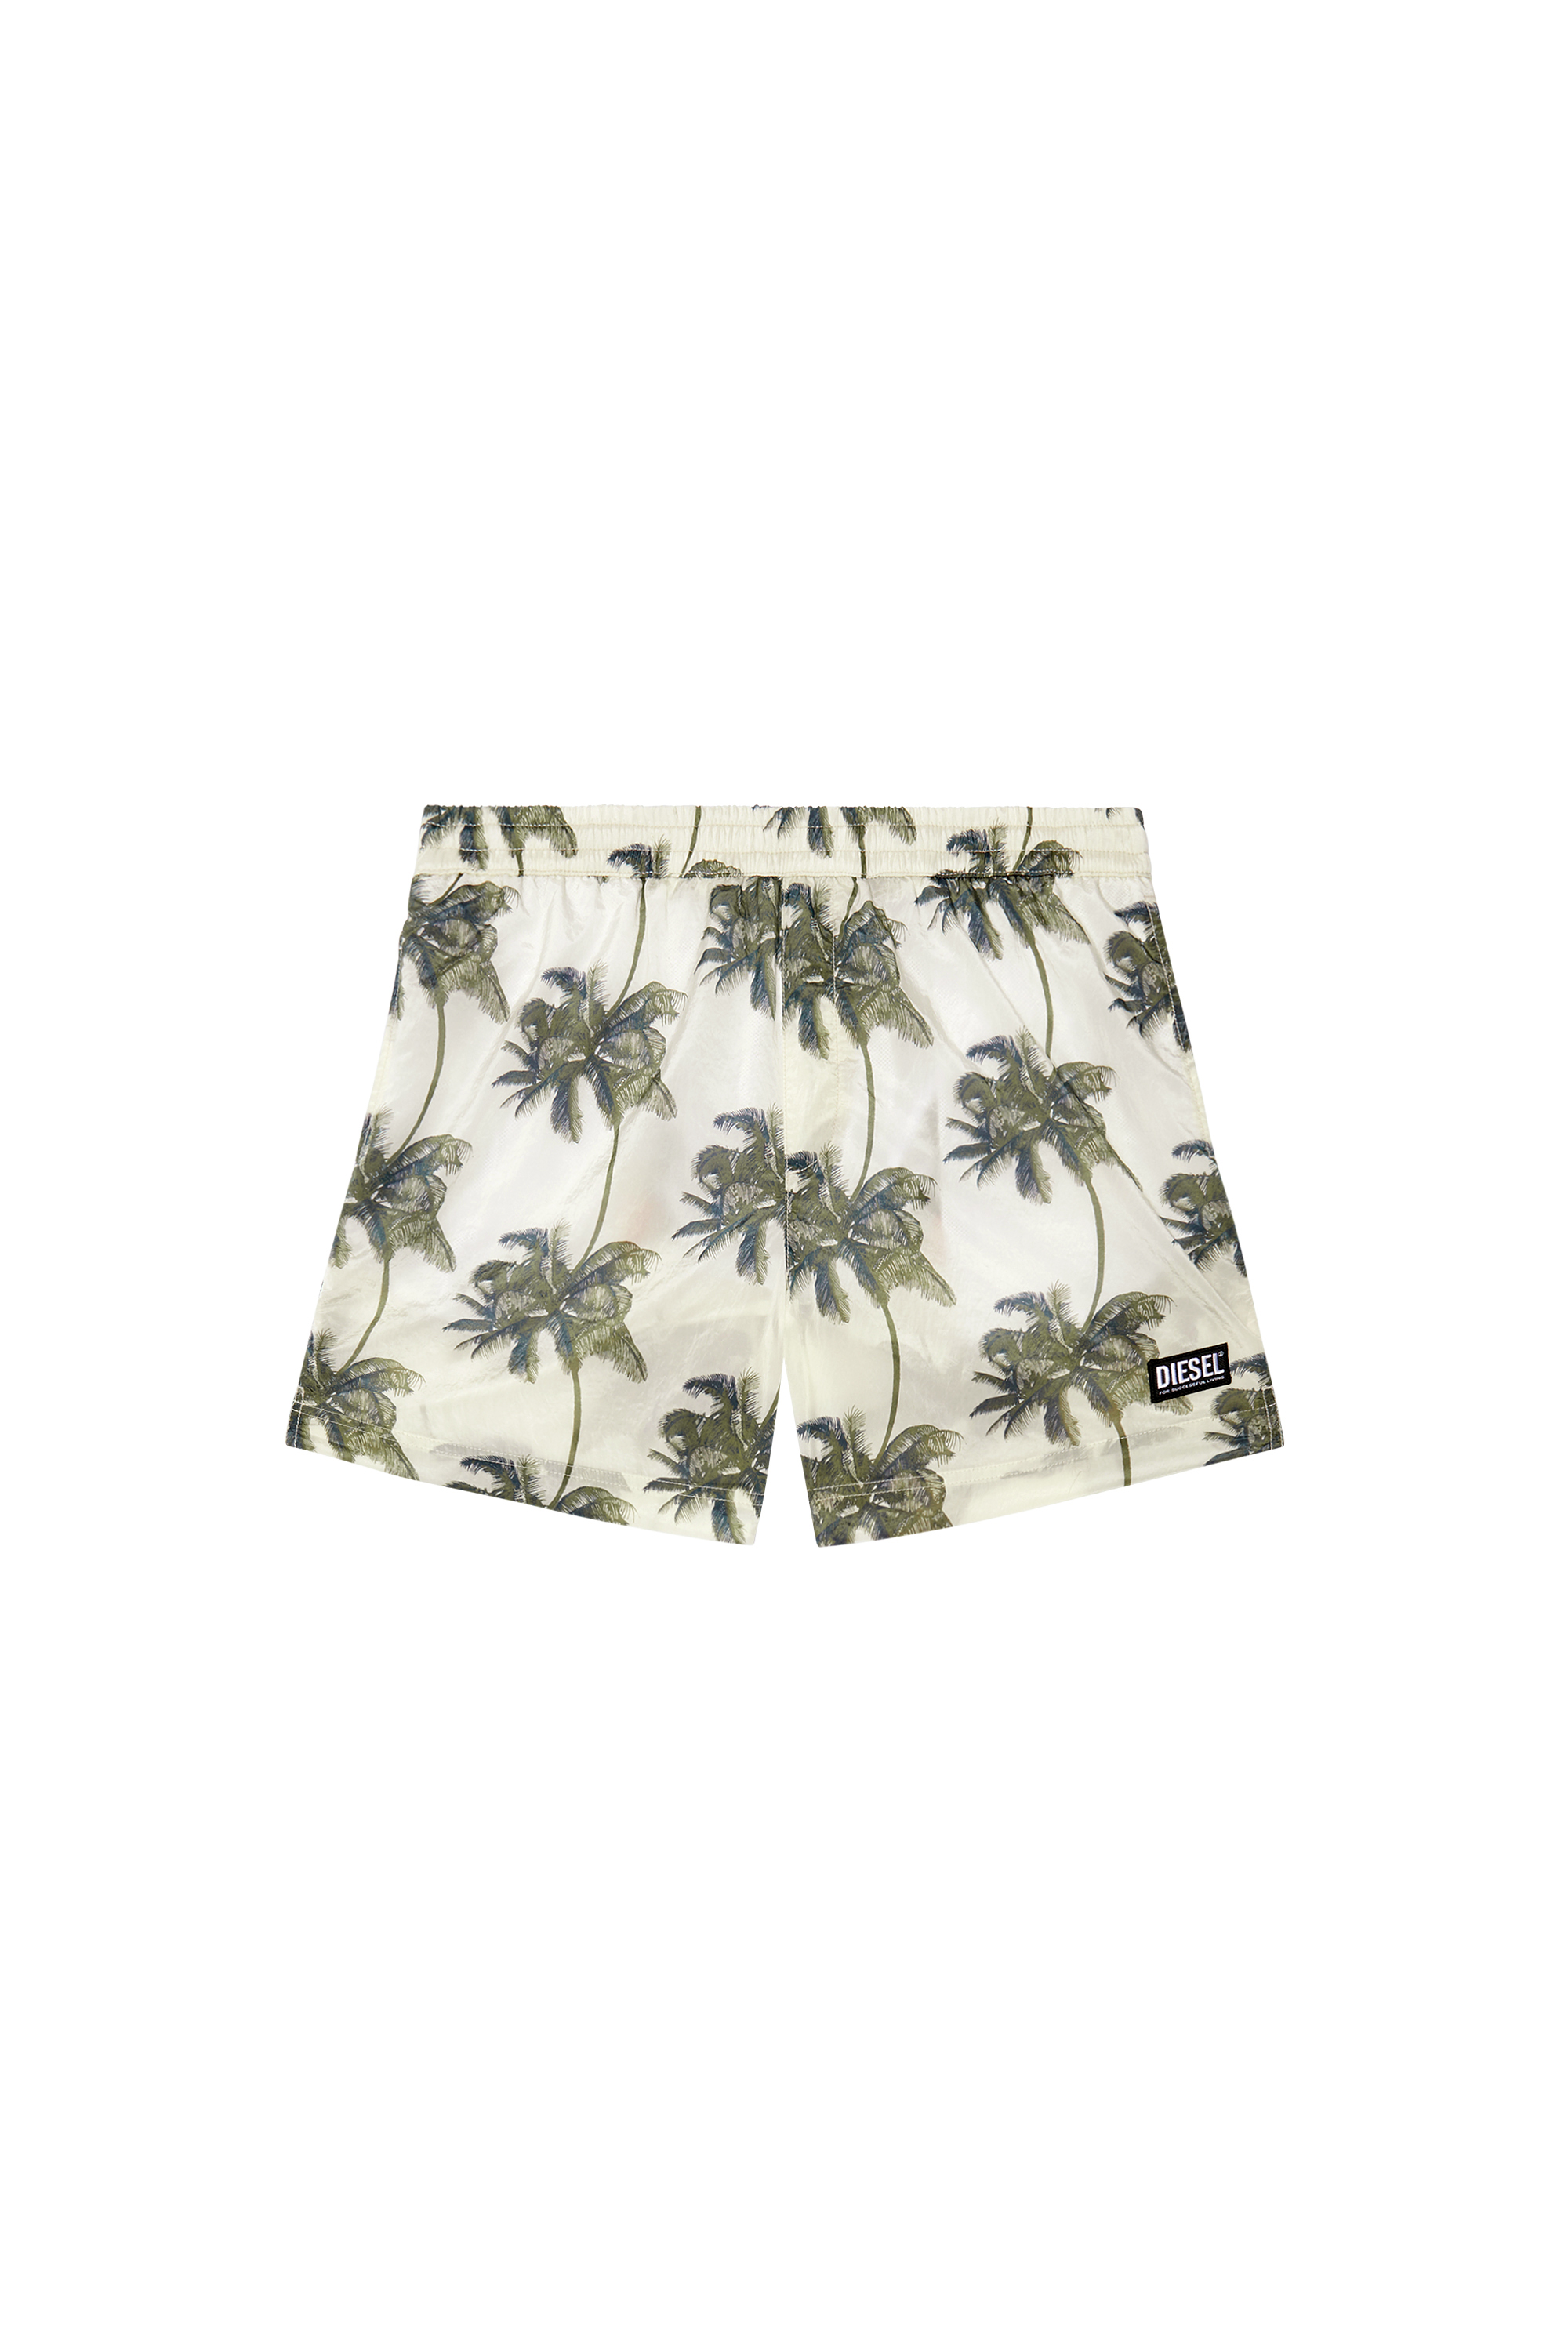 Diesel - BMBX-RIO-41CM-PARACHUTE, Man Palm-tree board shorts in crinkled fabric in Green - Image 5